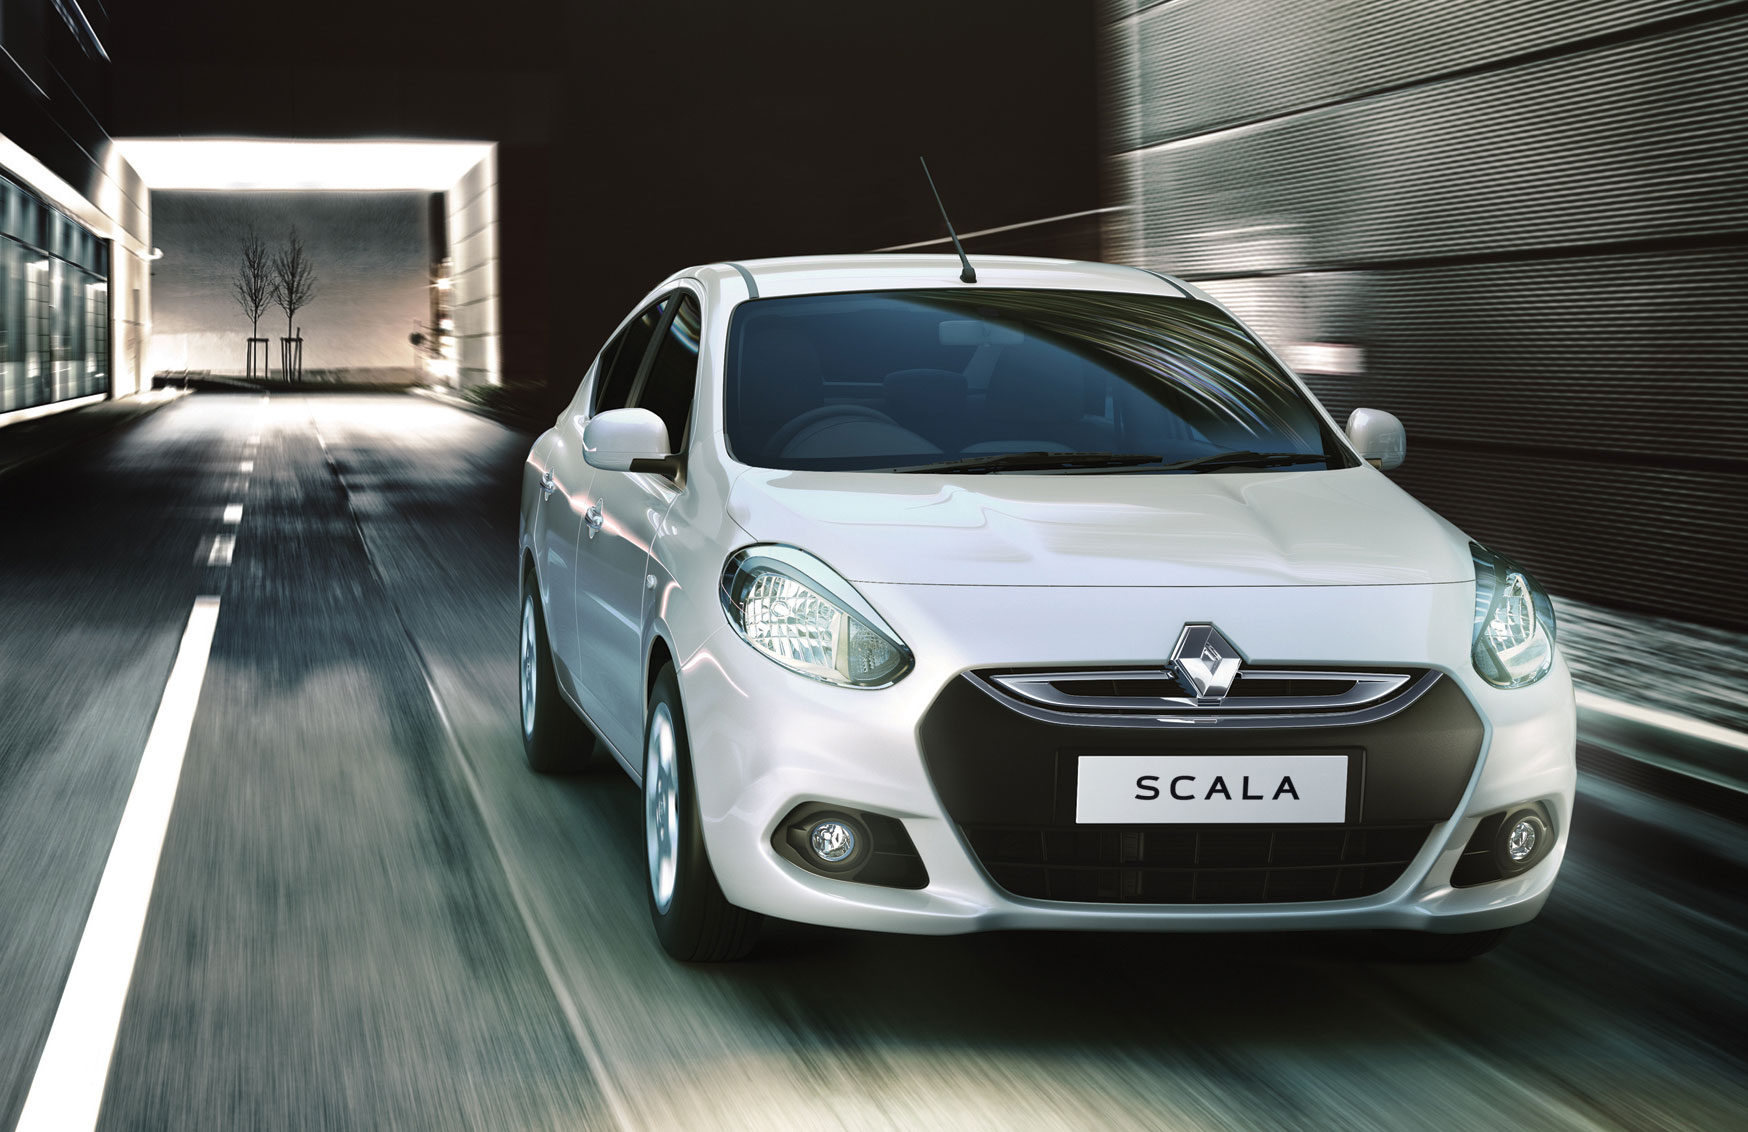 Renault Scala in action